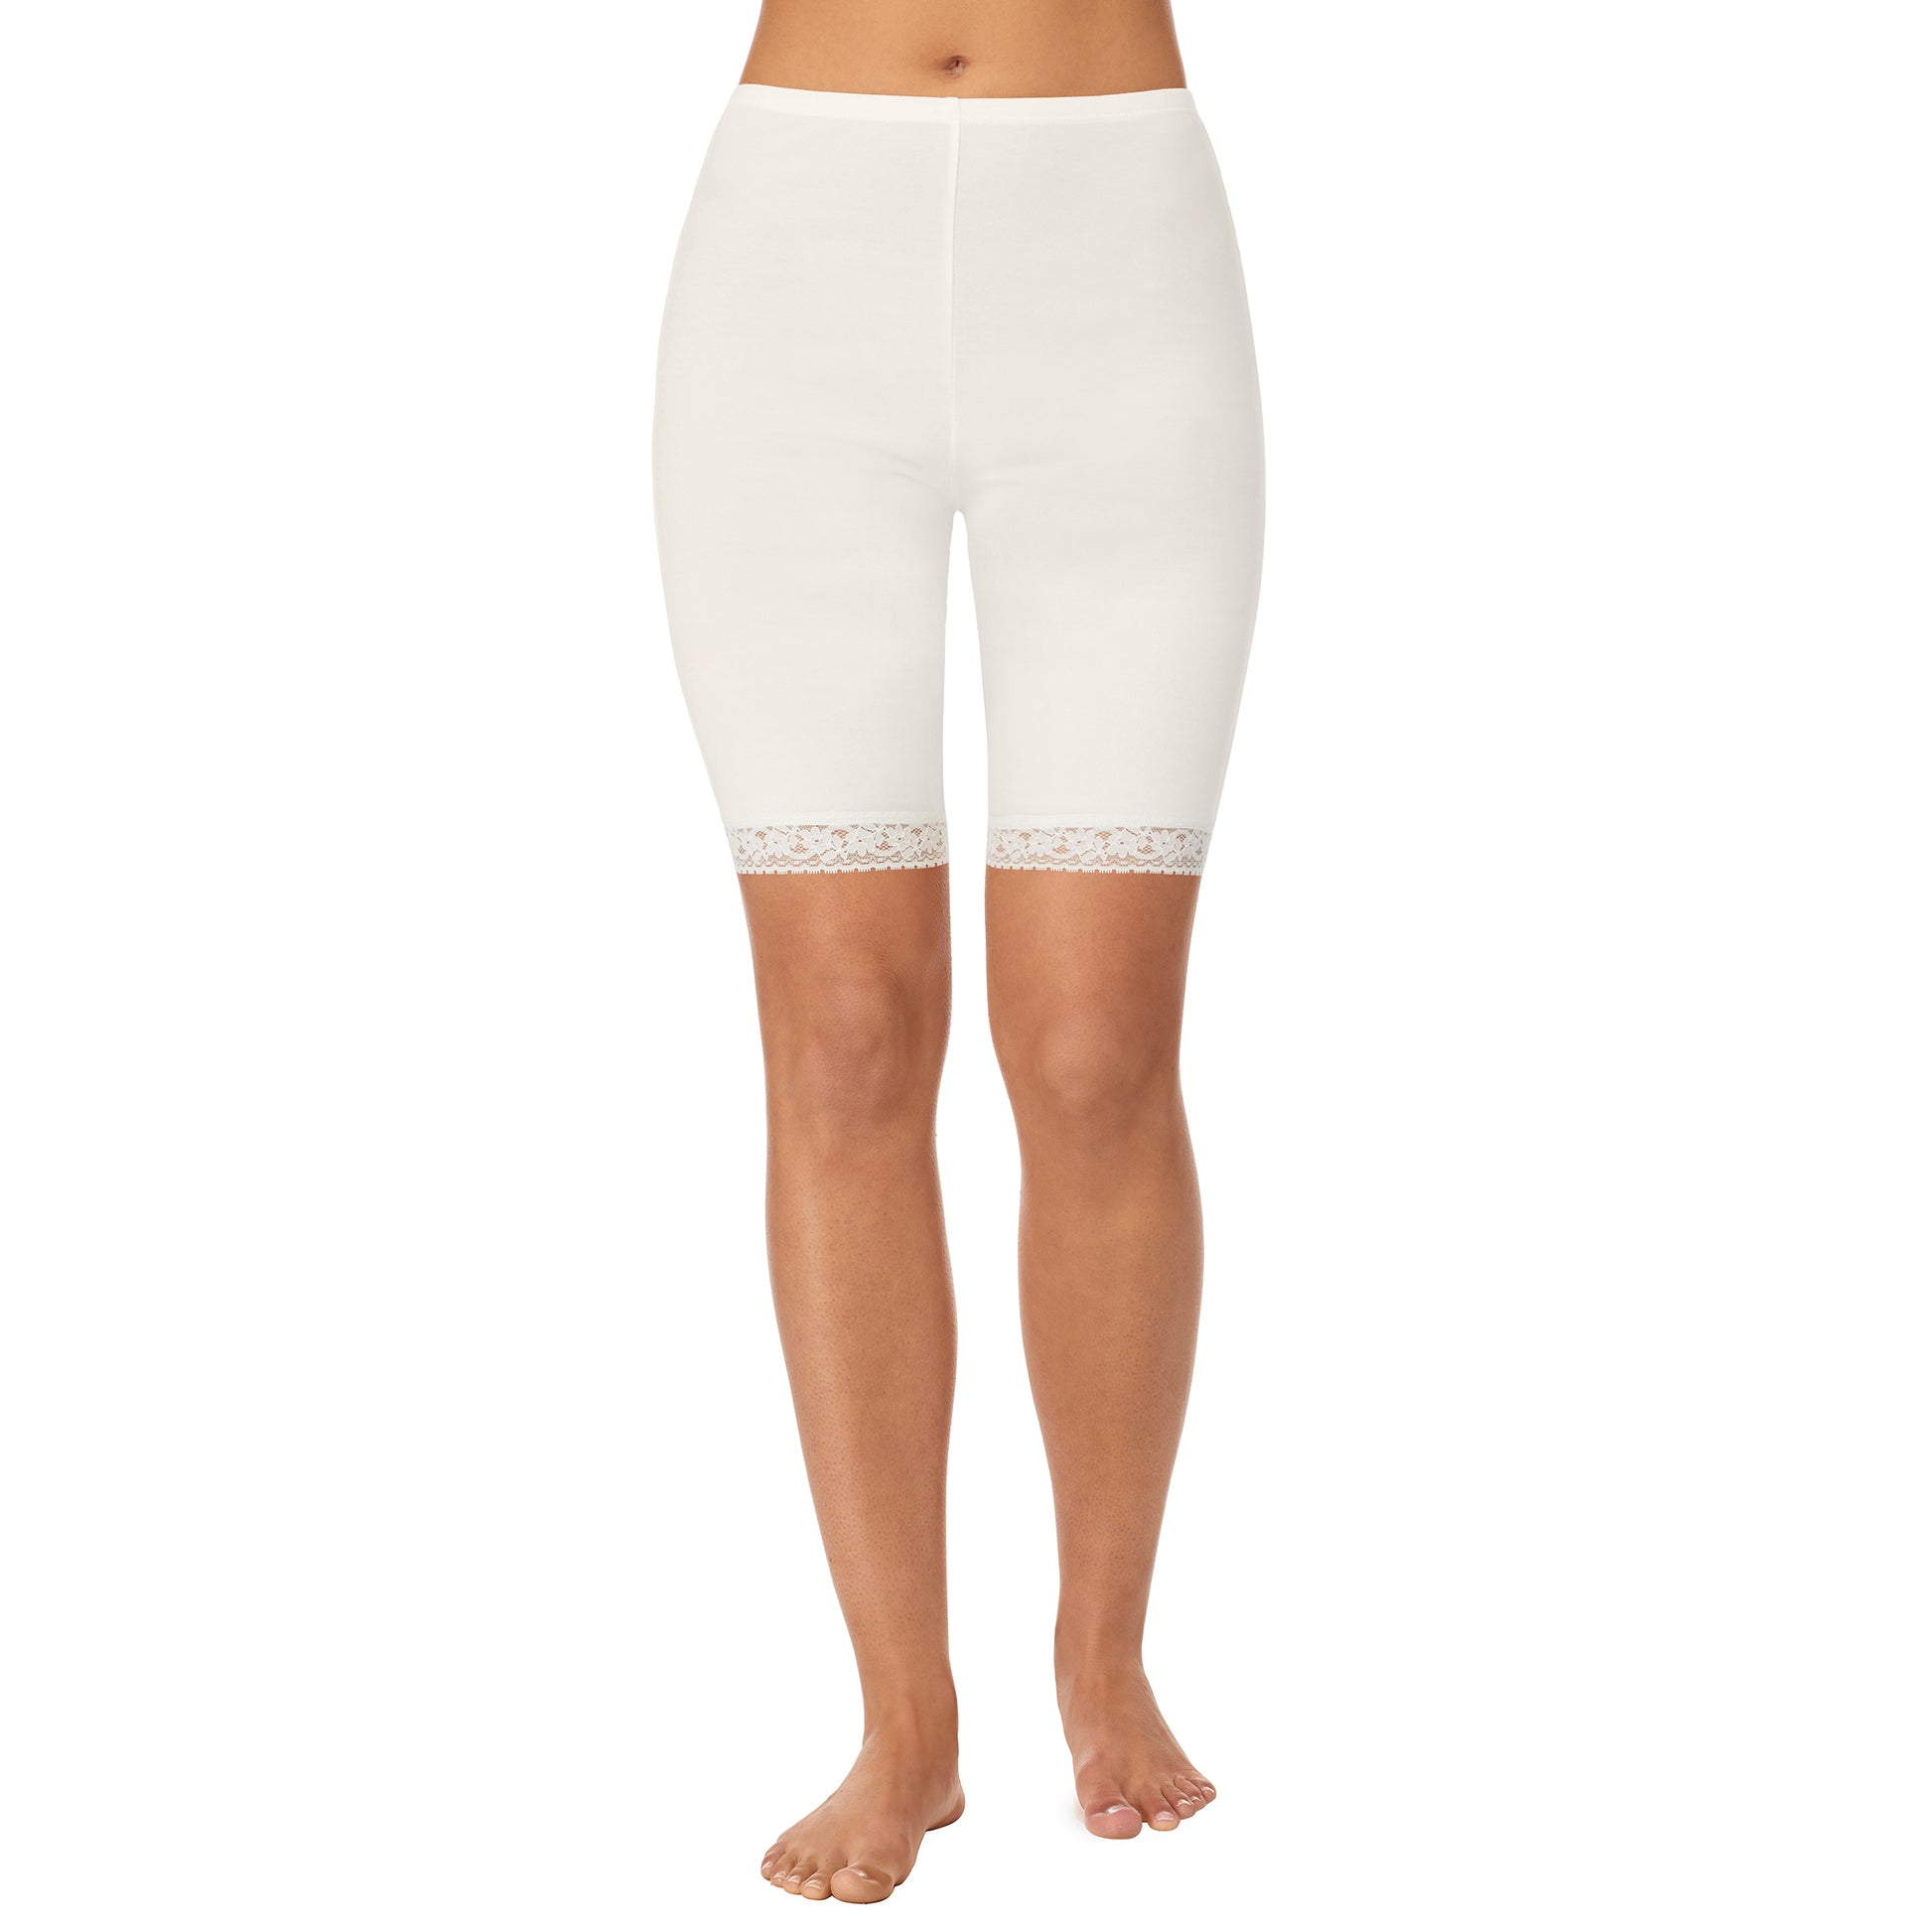  Ivory;Model is wearing size S. She is 5’9”, Bust 32”, Waist 25.5”, Hips 36”. @A lady wearing a white lace edge short.